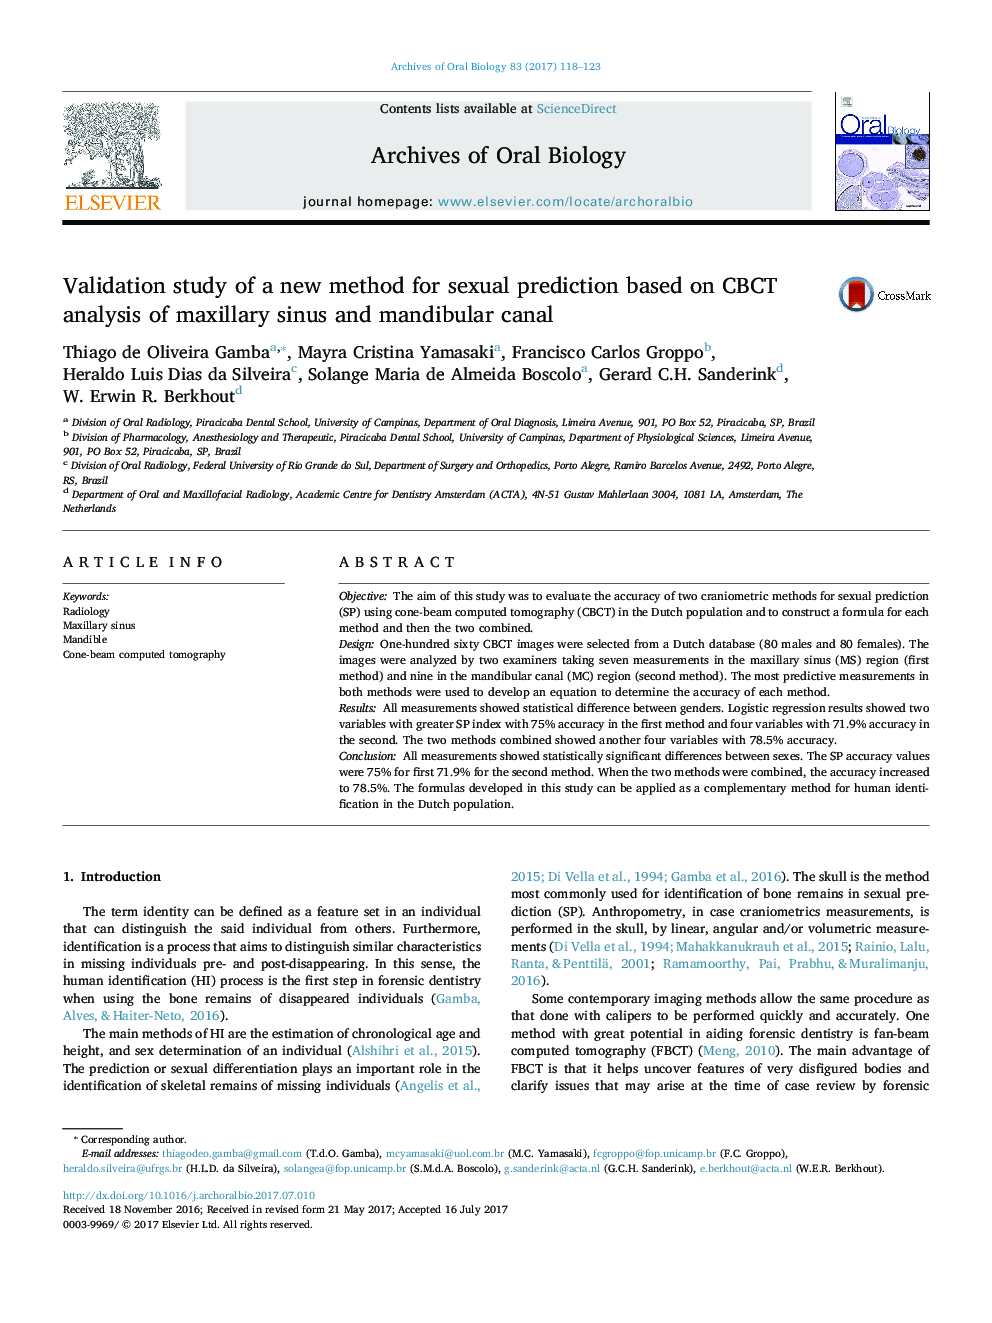 Validation study of a new method for sexual prediction based on CBCT analysis of maxillary sinus and mandibular canal